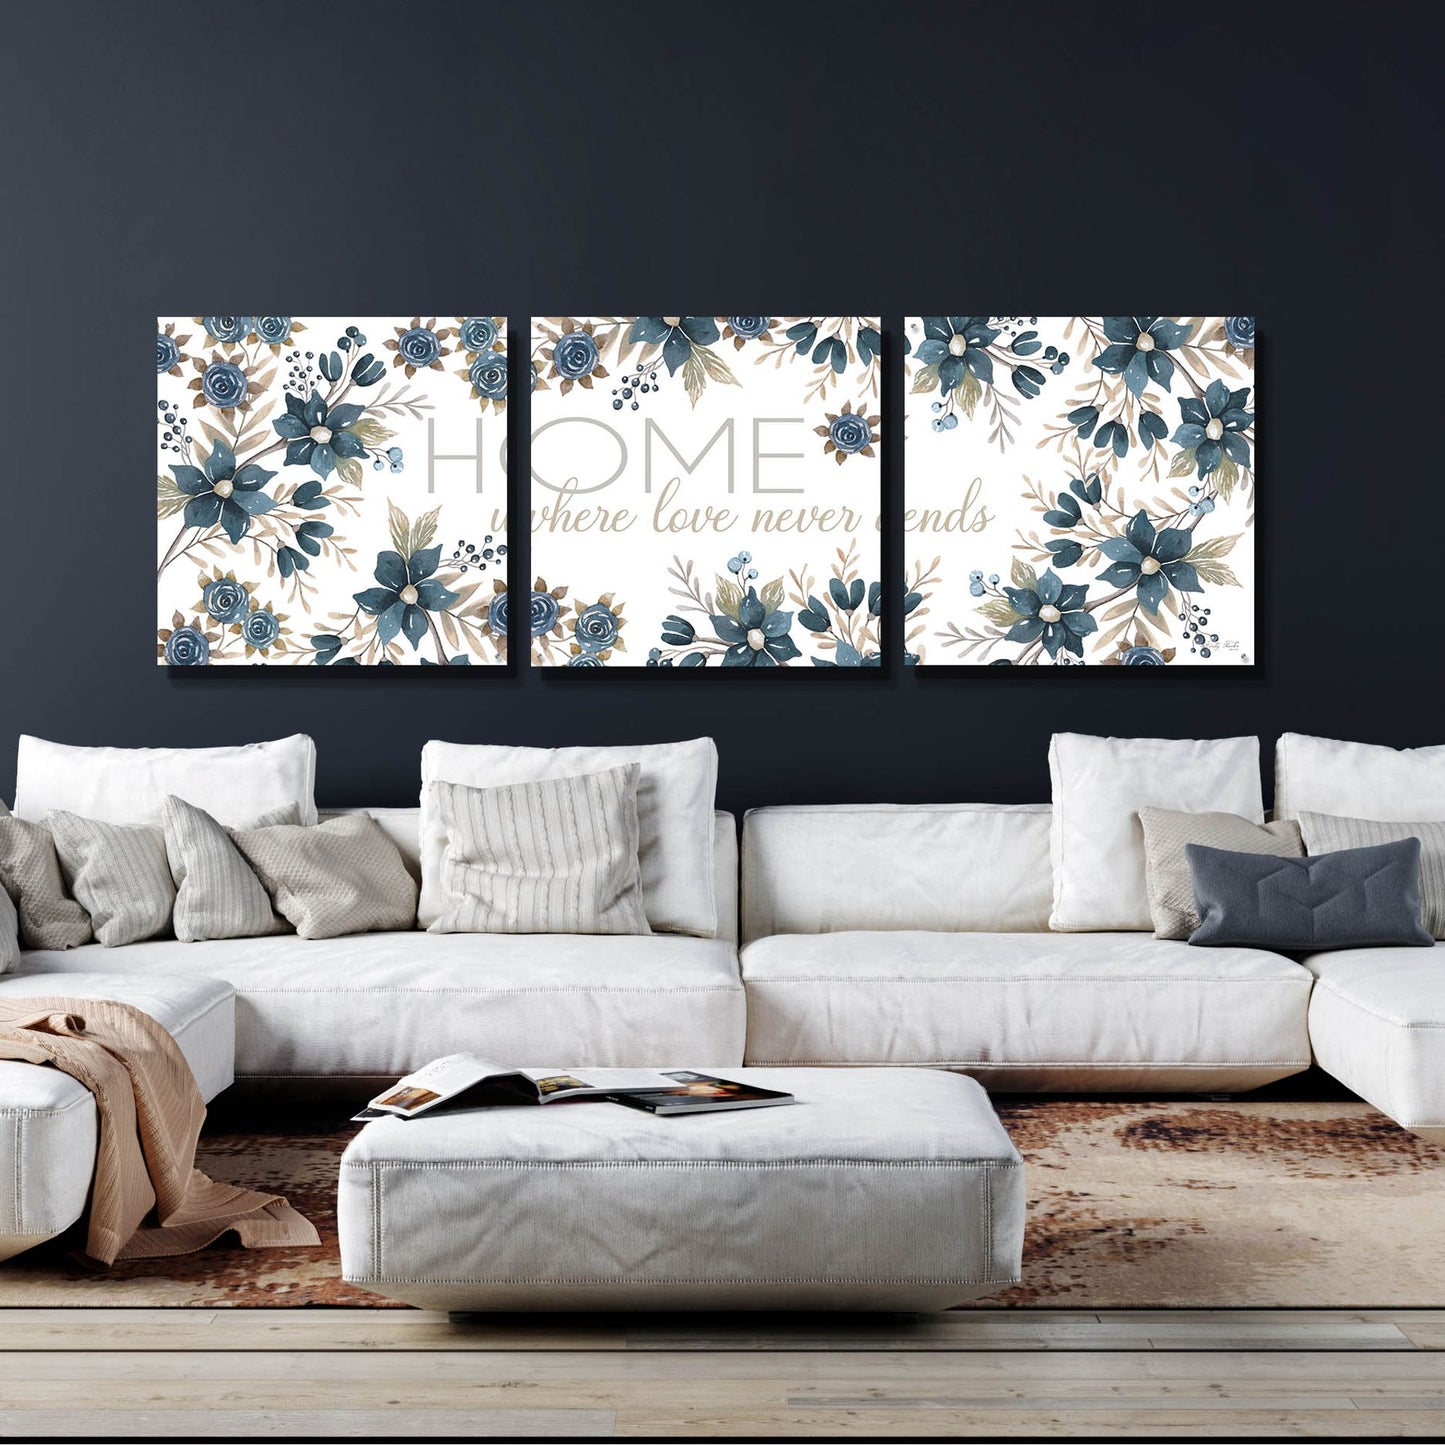 Epic Art 'HOME - Where Love Never Ends' by Cindy Jacobs, Acrylic Glass Wall Art, 3 Piece Set,108x36